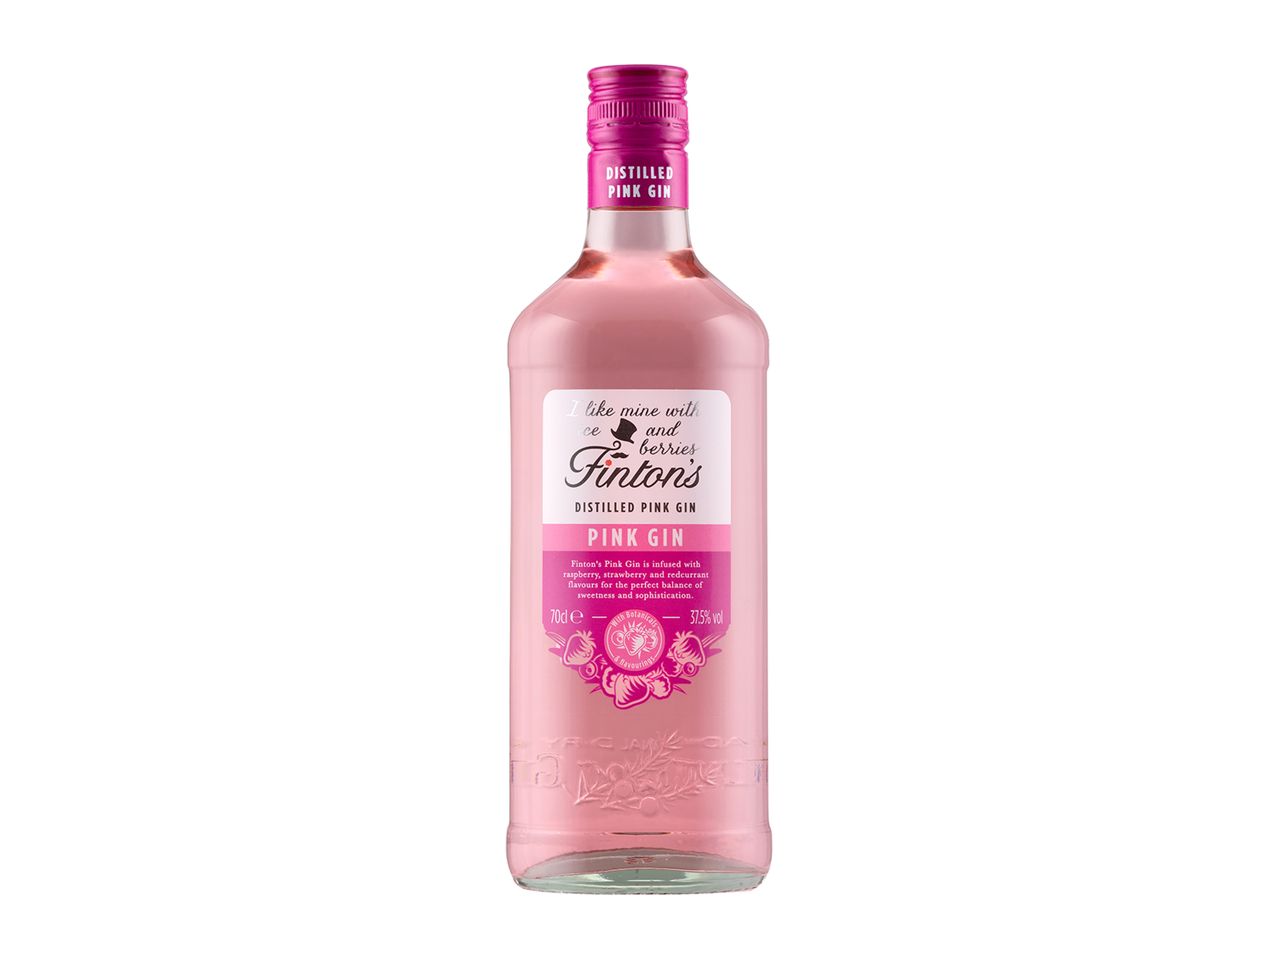 Go to full screen view: Finton's Pink Gin 37.5% Vol - Image 1